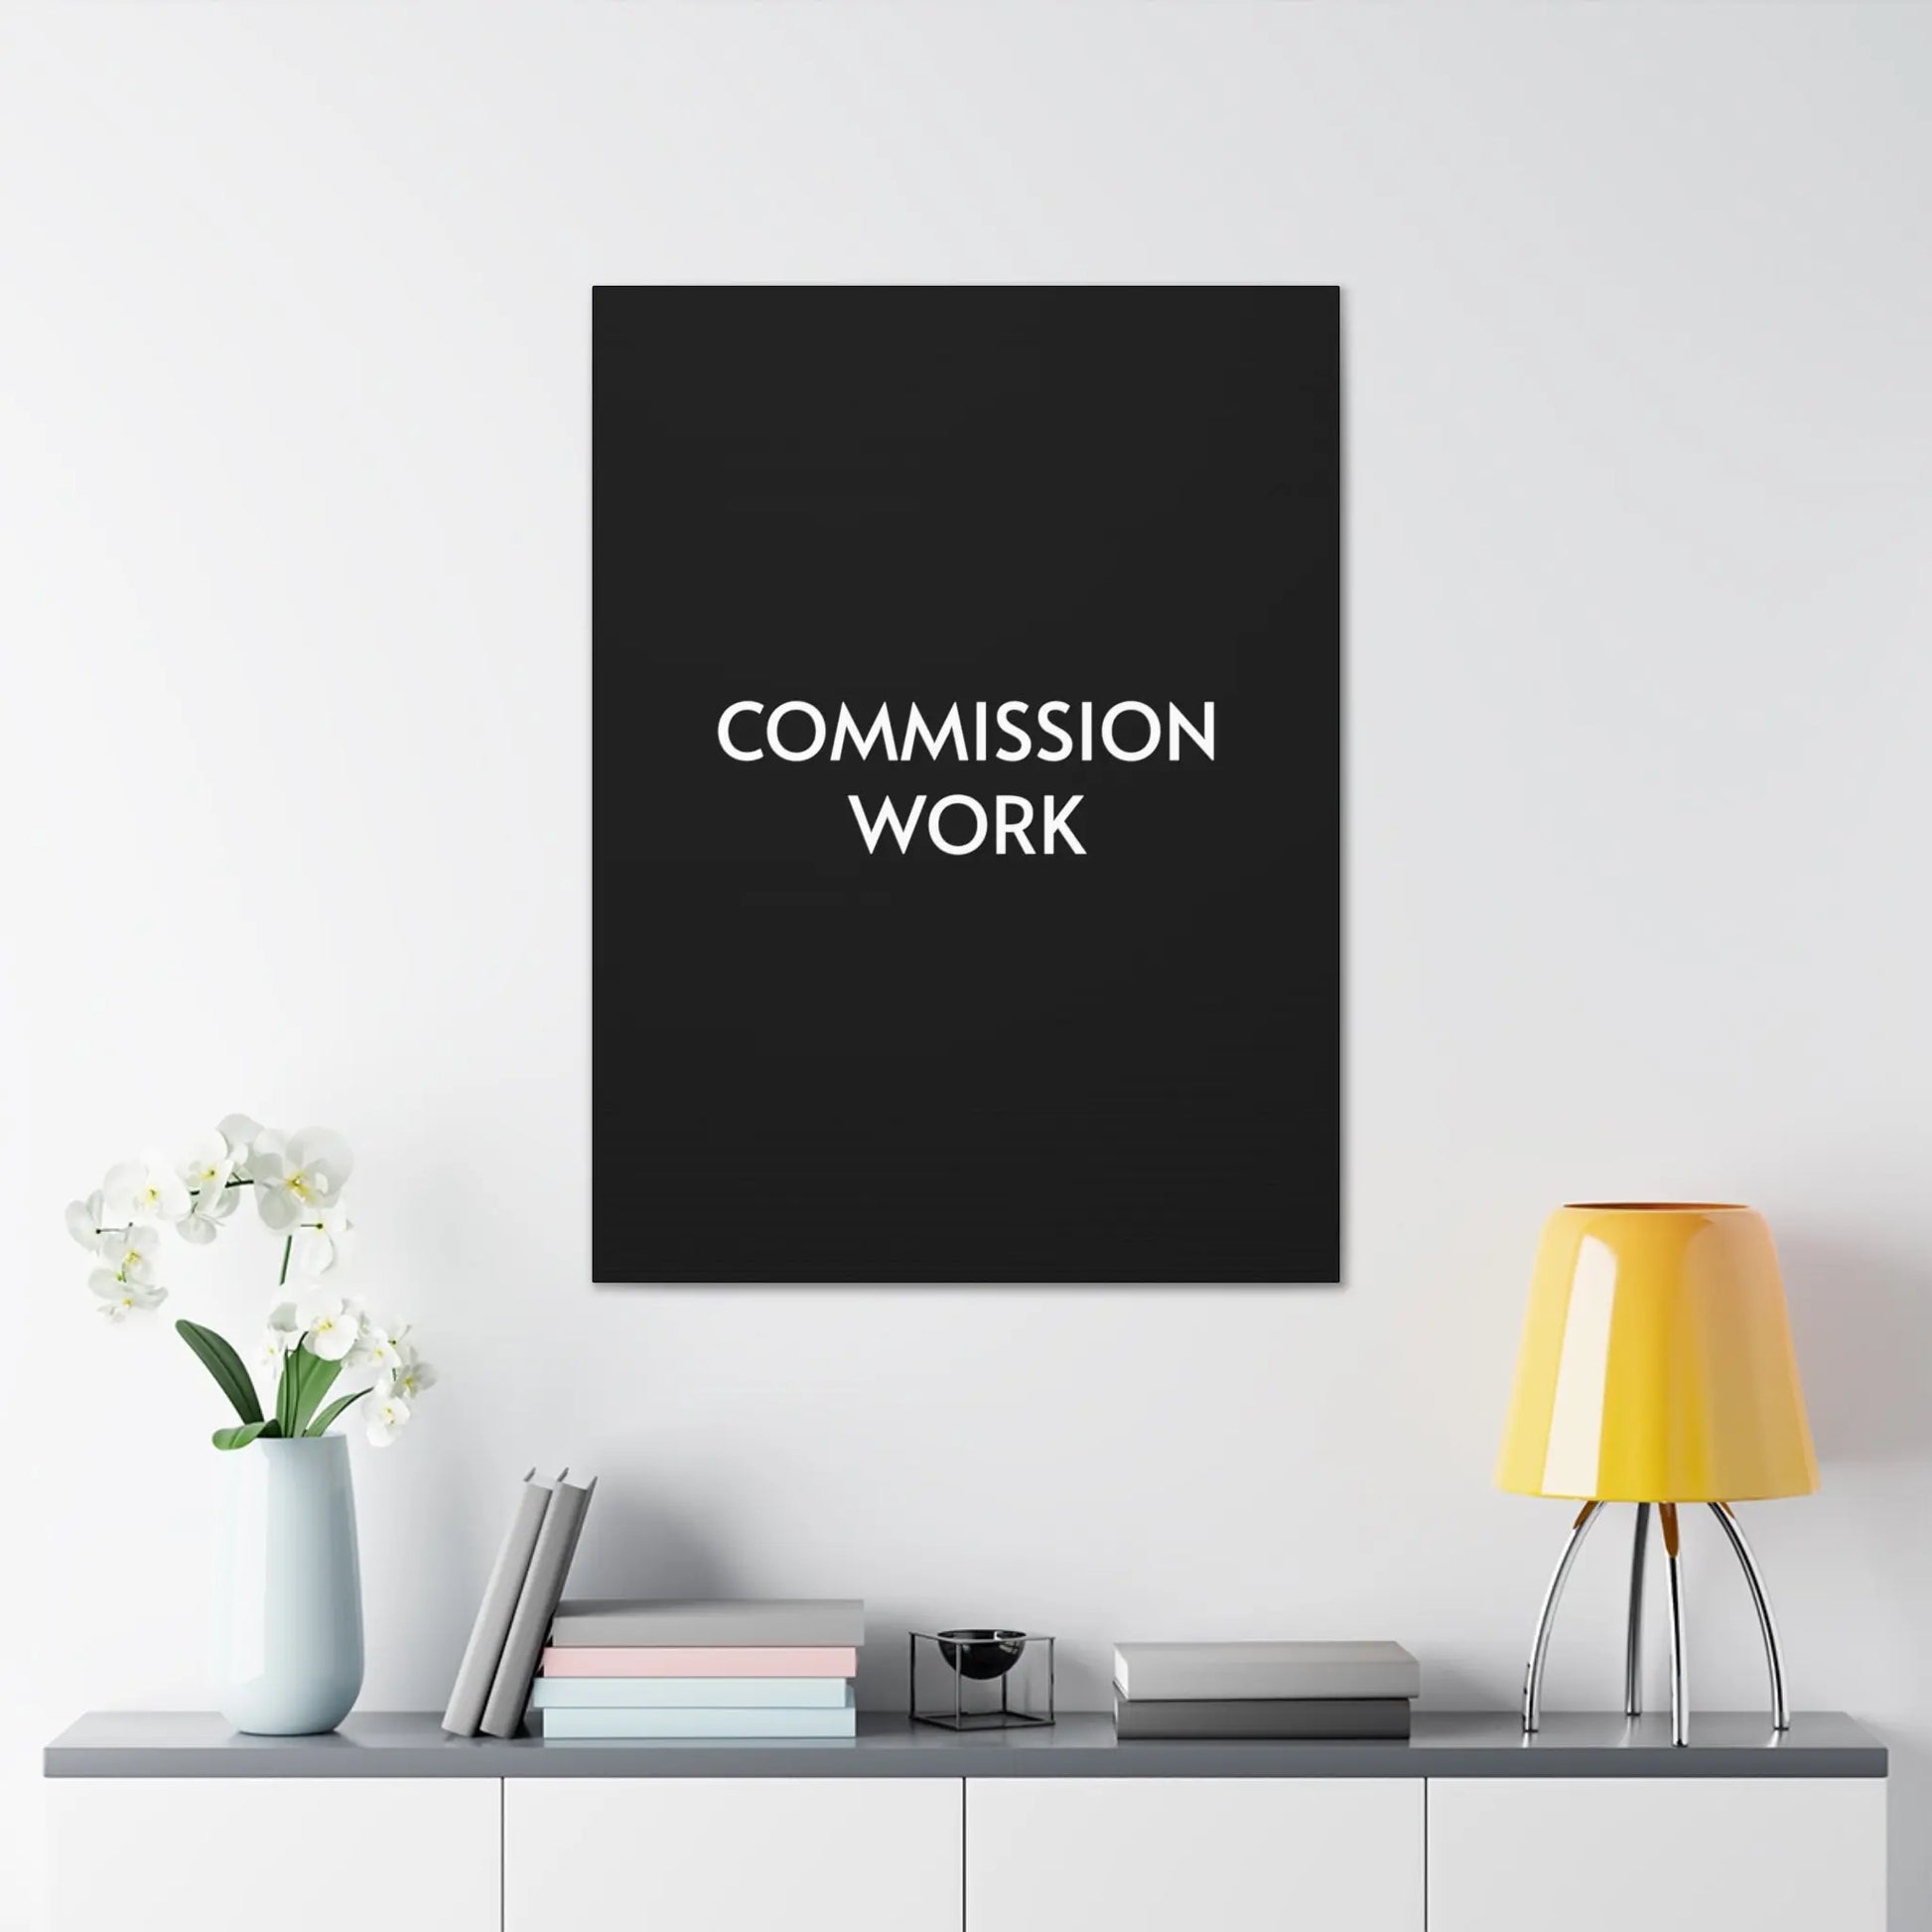 Commission Work on Canvas (Unframed) | Canvas Gallery Wraps 